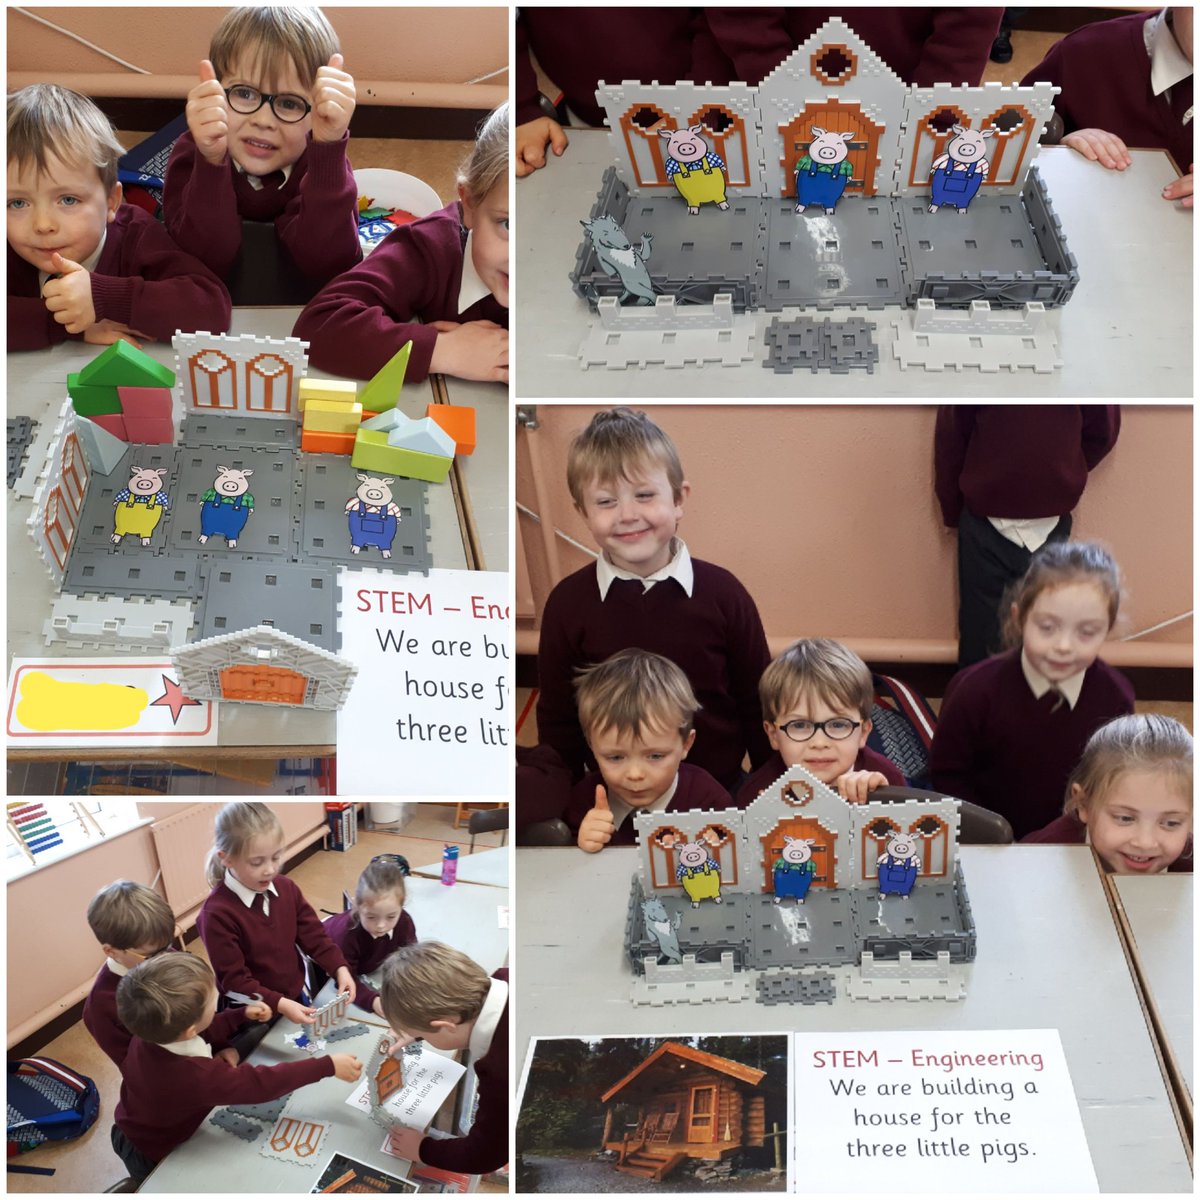 We have been learning about 'Homes' and also 'Na Trí Mhuicín'. So the Junior Infants decided to construct a new home for these three little pigs. @PDSTSciences @PDSTGaeilge #arlesns #ScienceWeek2020 #threelittlepigs #natrímhuicín